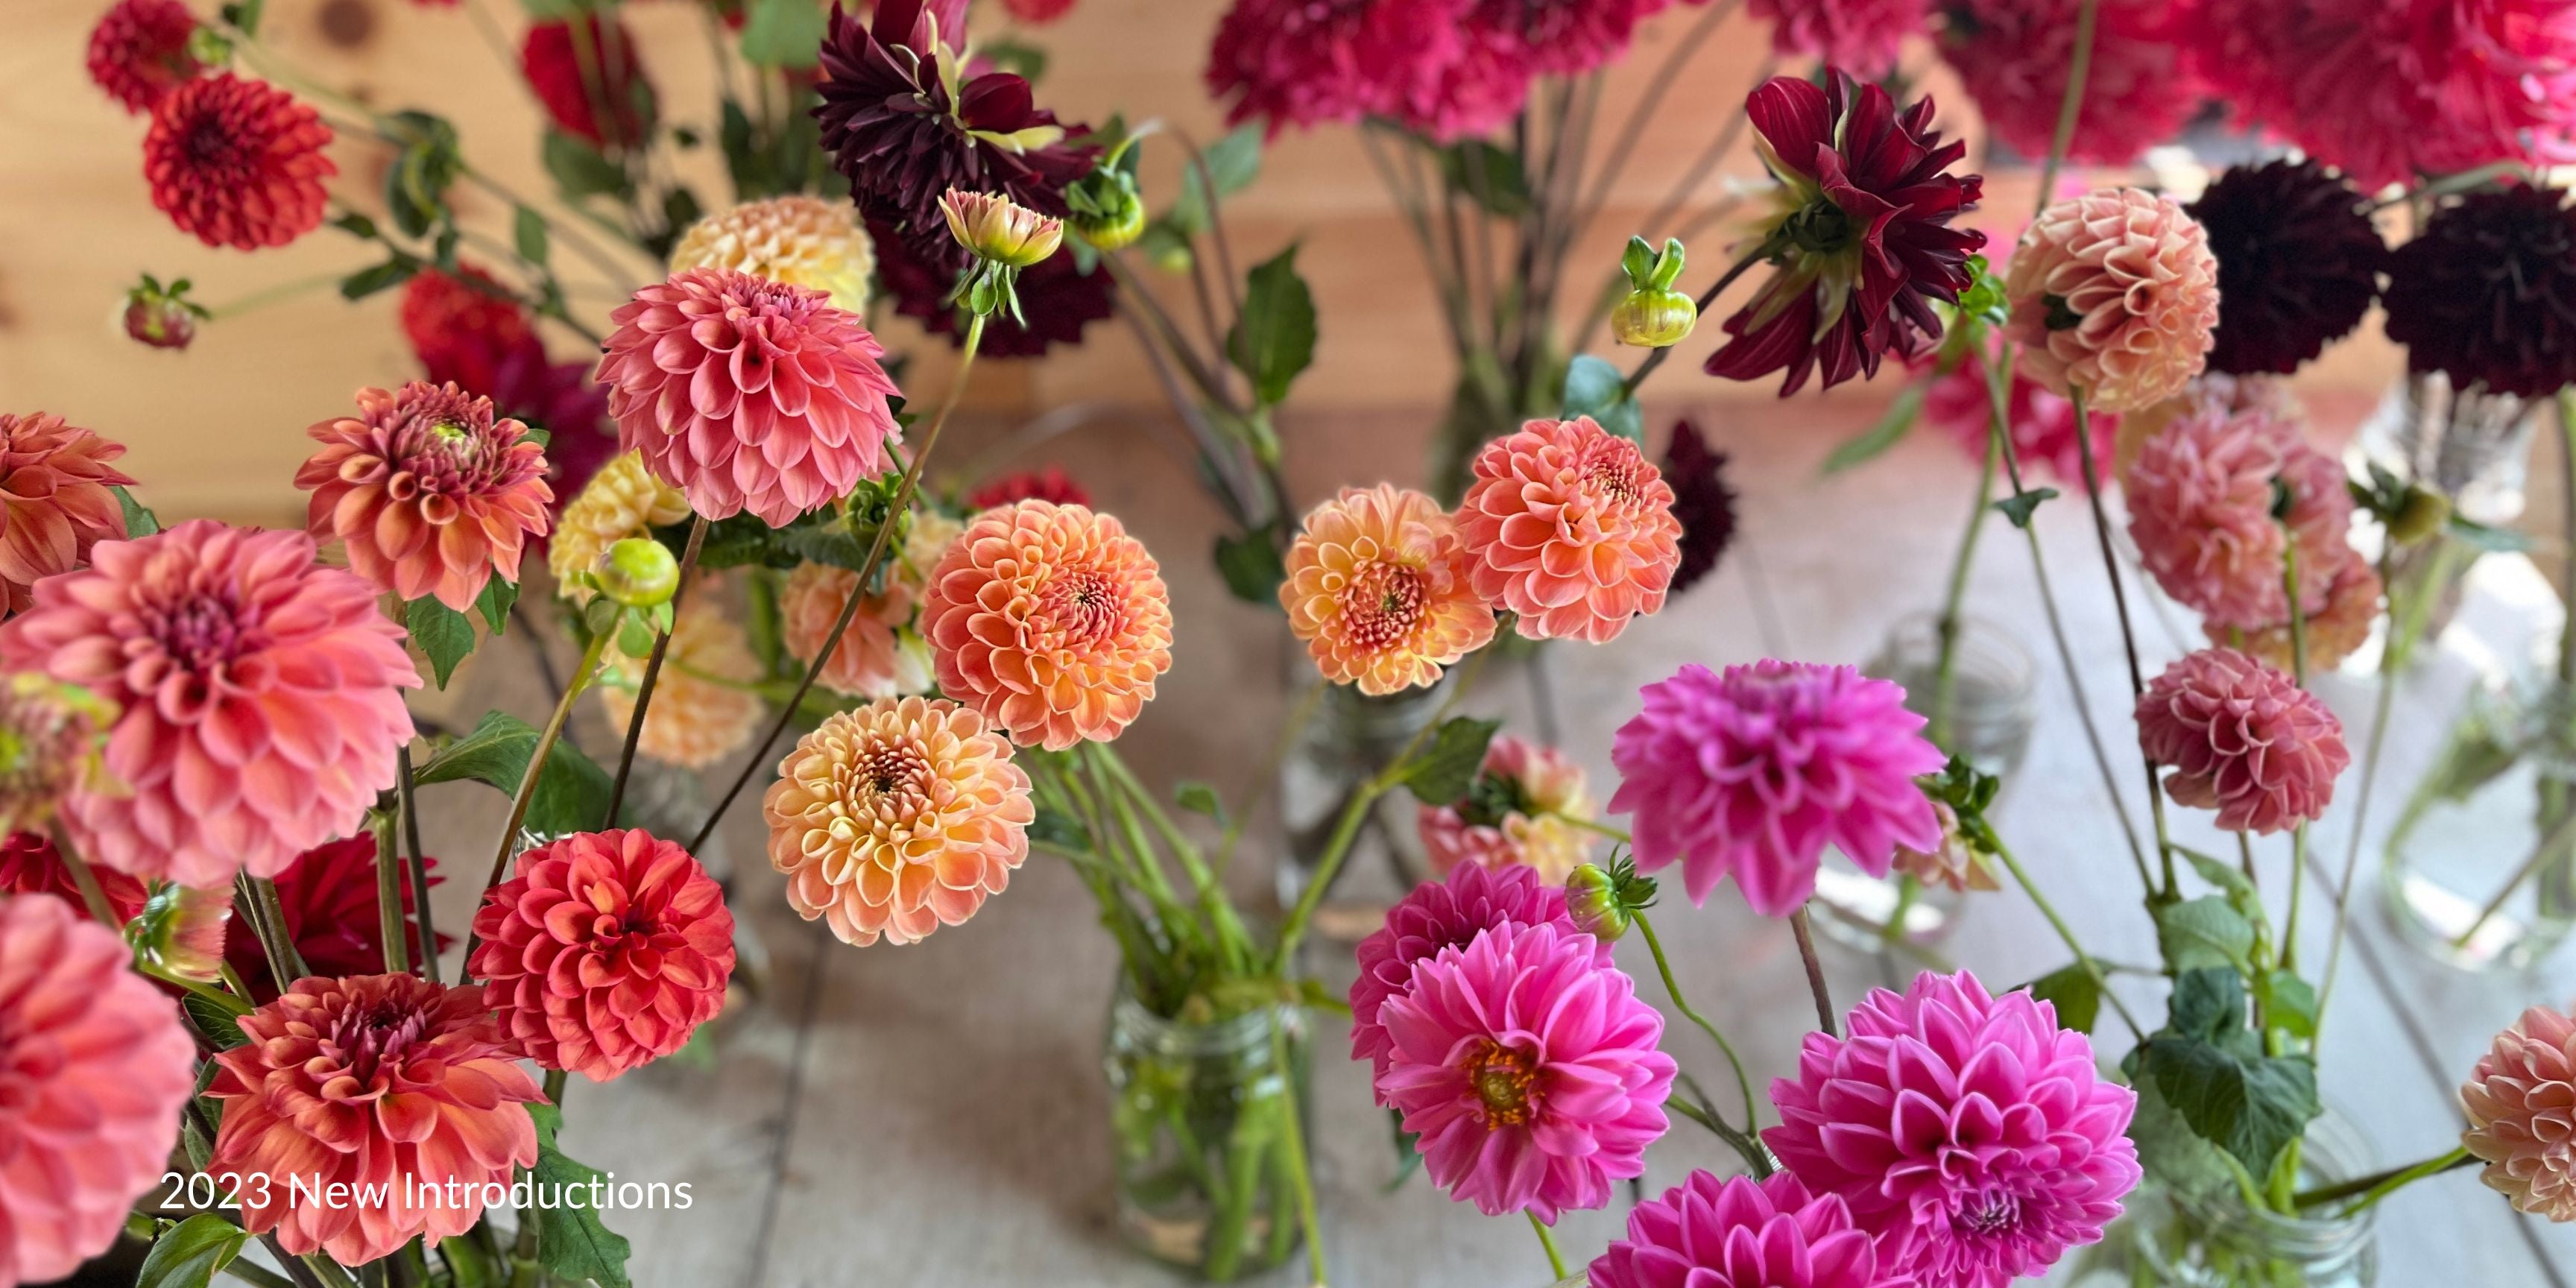 2023 new dahlia introductions